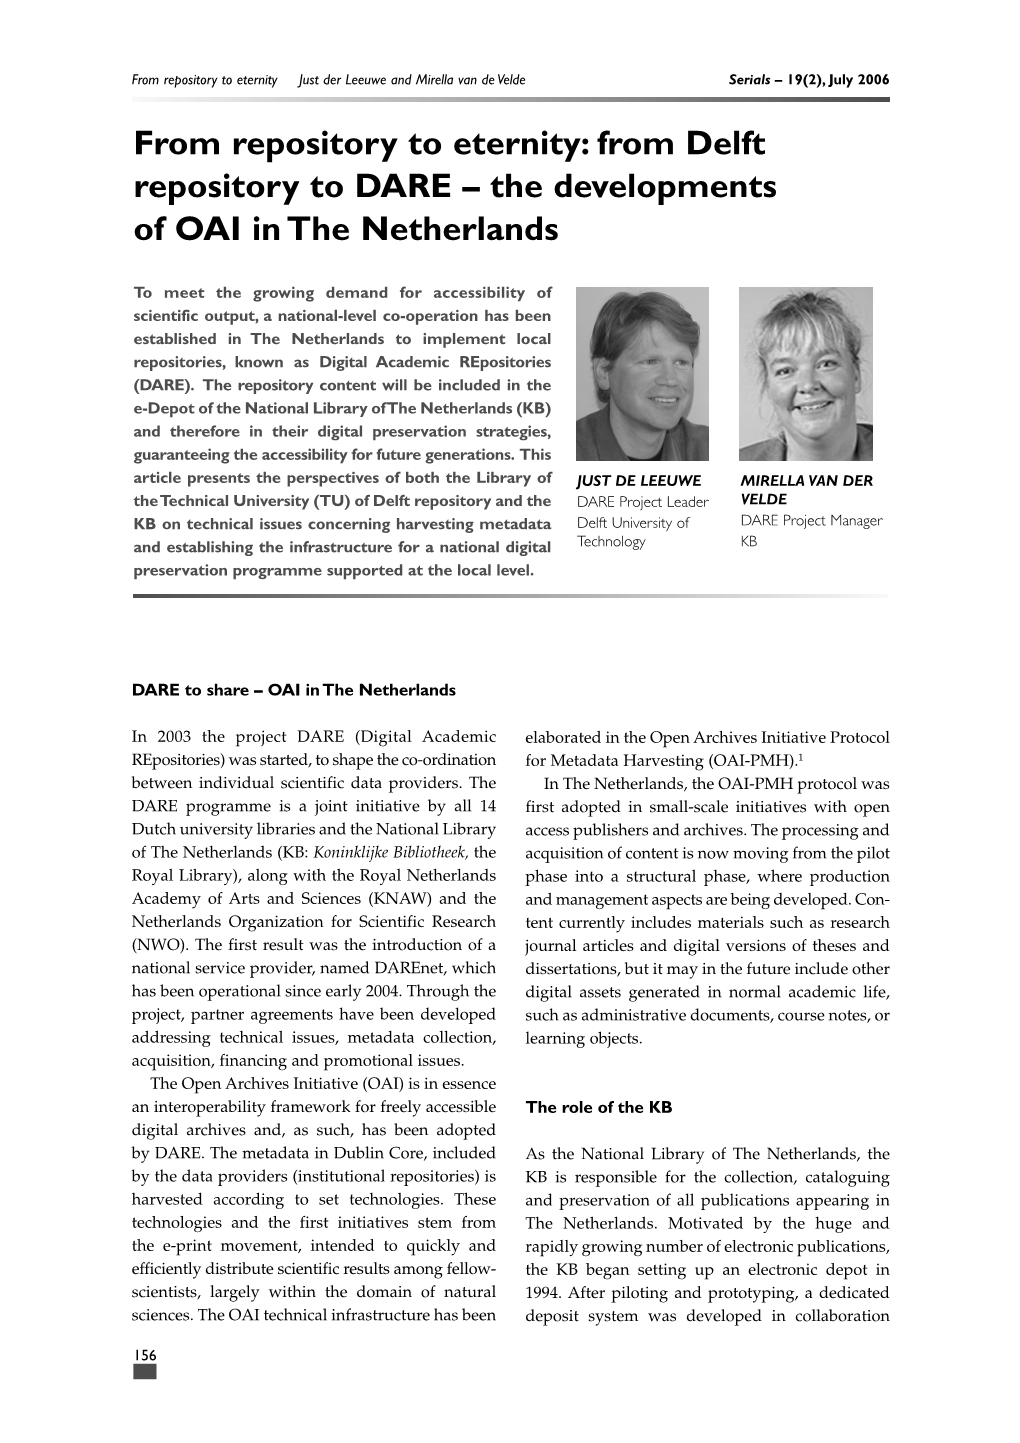 From Delft Repository to DARE – the Developments of OAI in the Netherlands